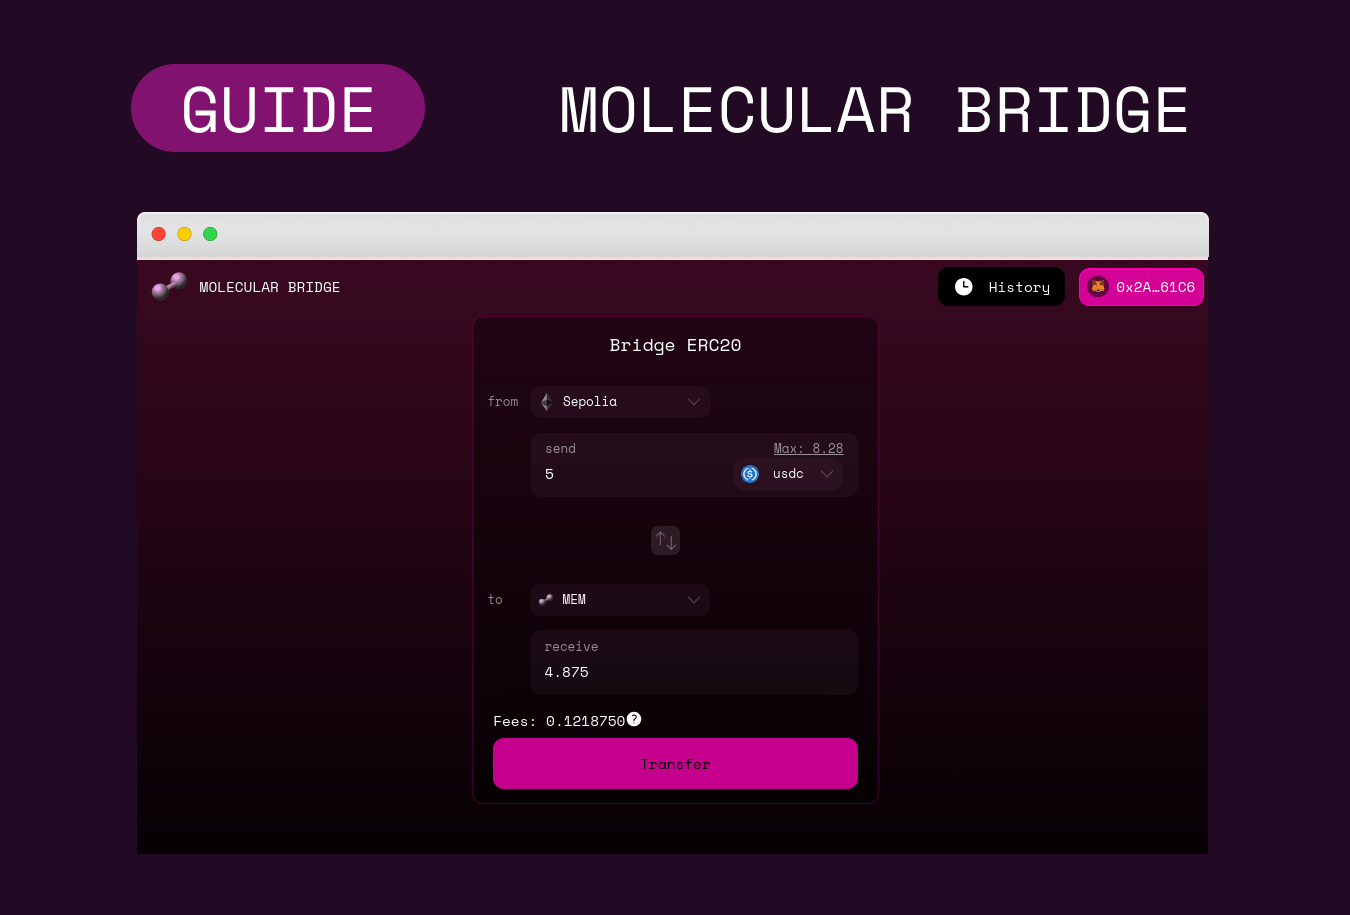 Guide: How to Use the Molecular Bridge